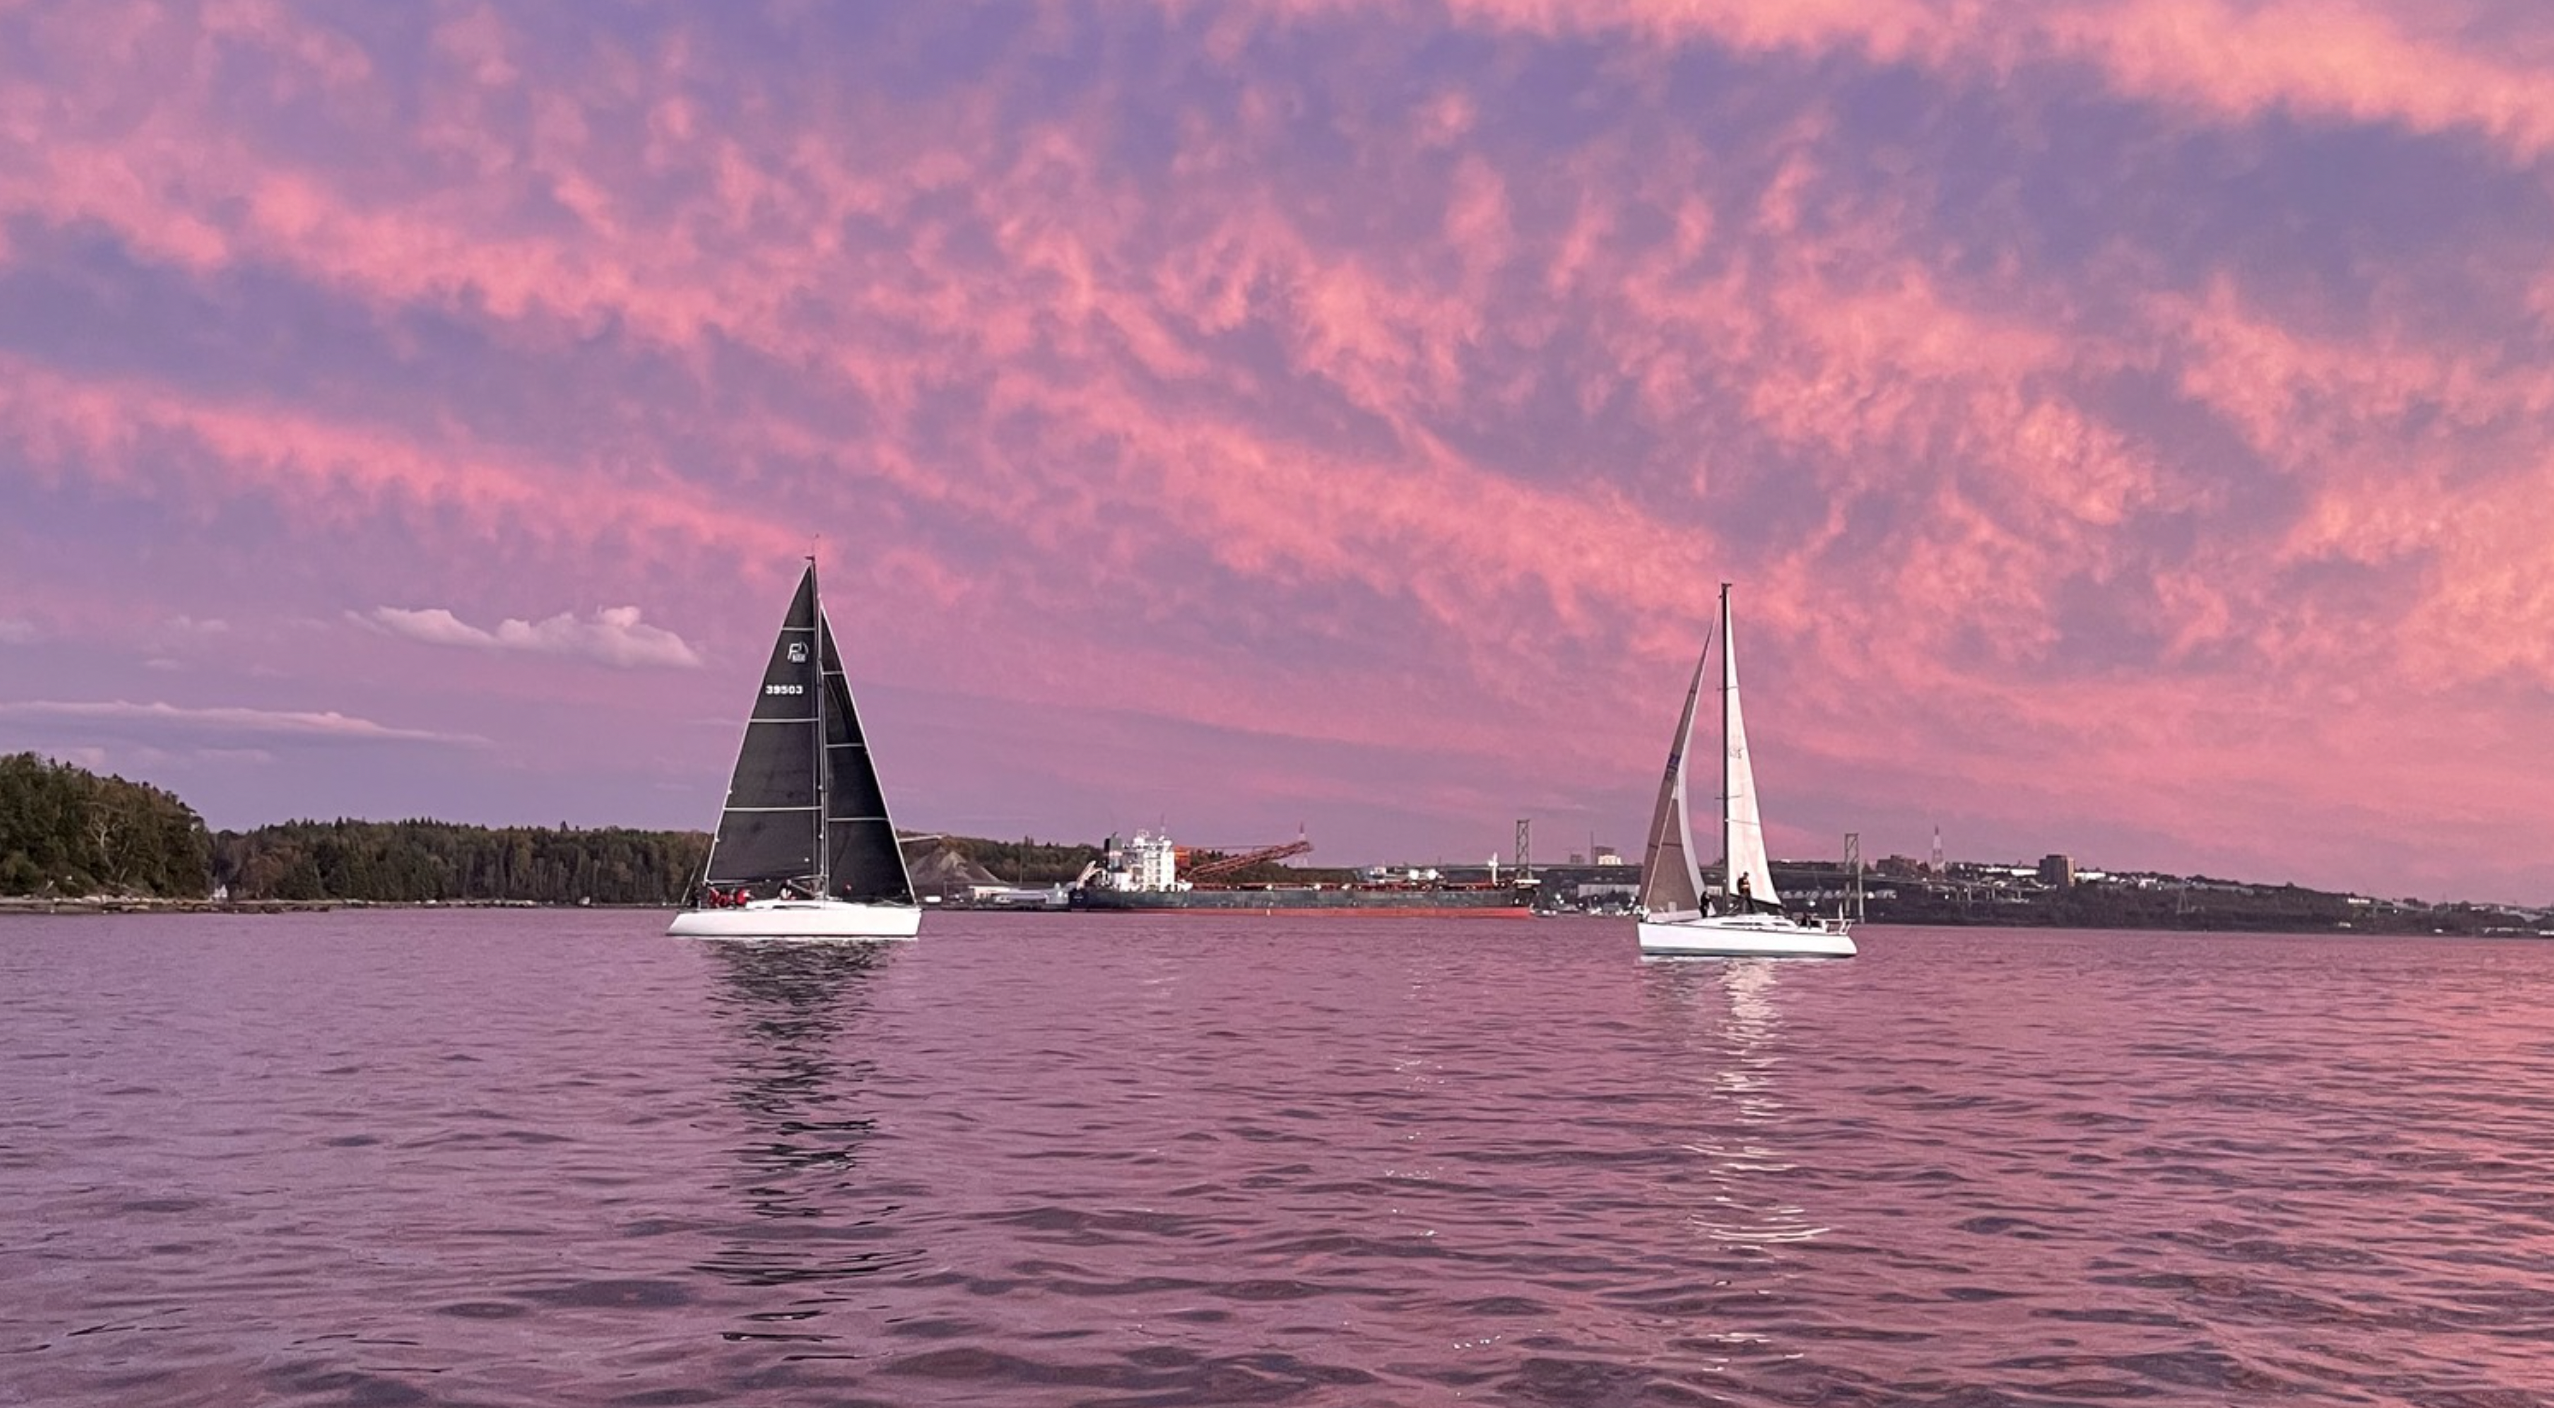 Sailboat racing during club race nights at DYC under a beautiful sunset.